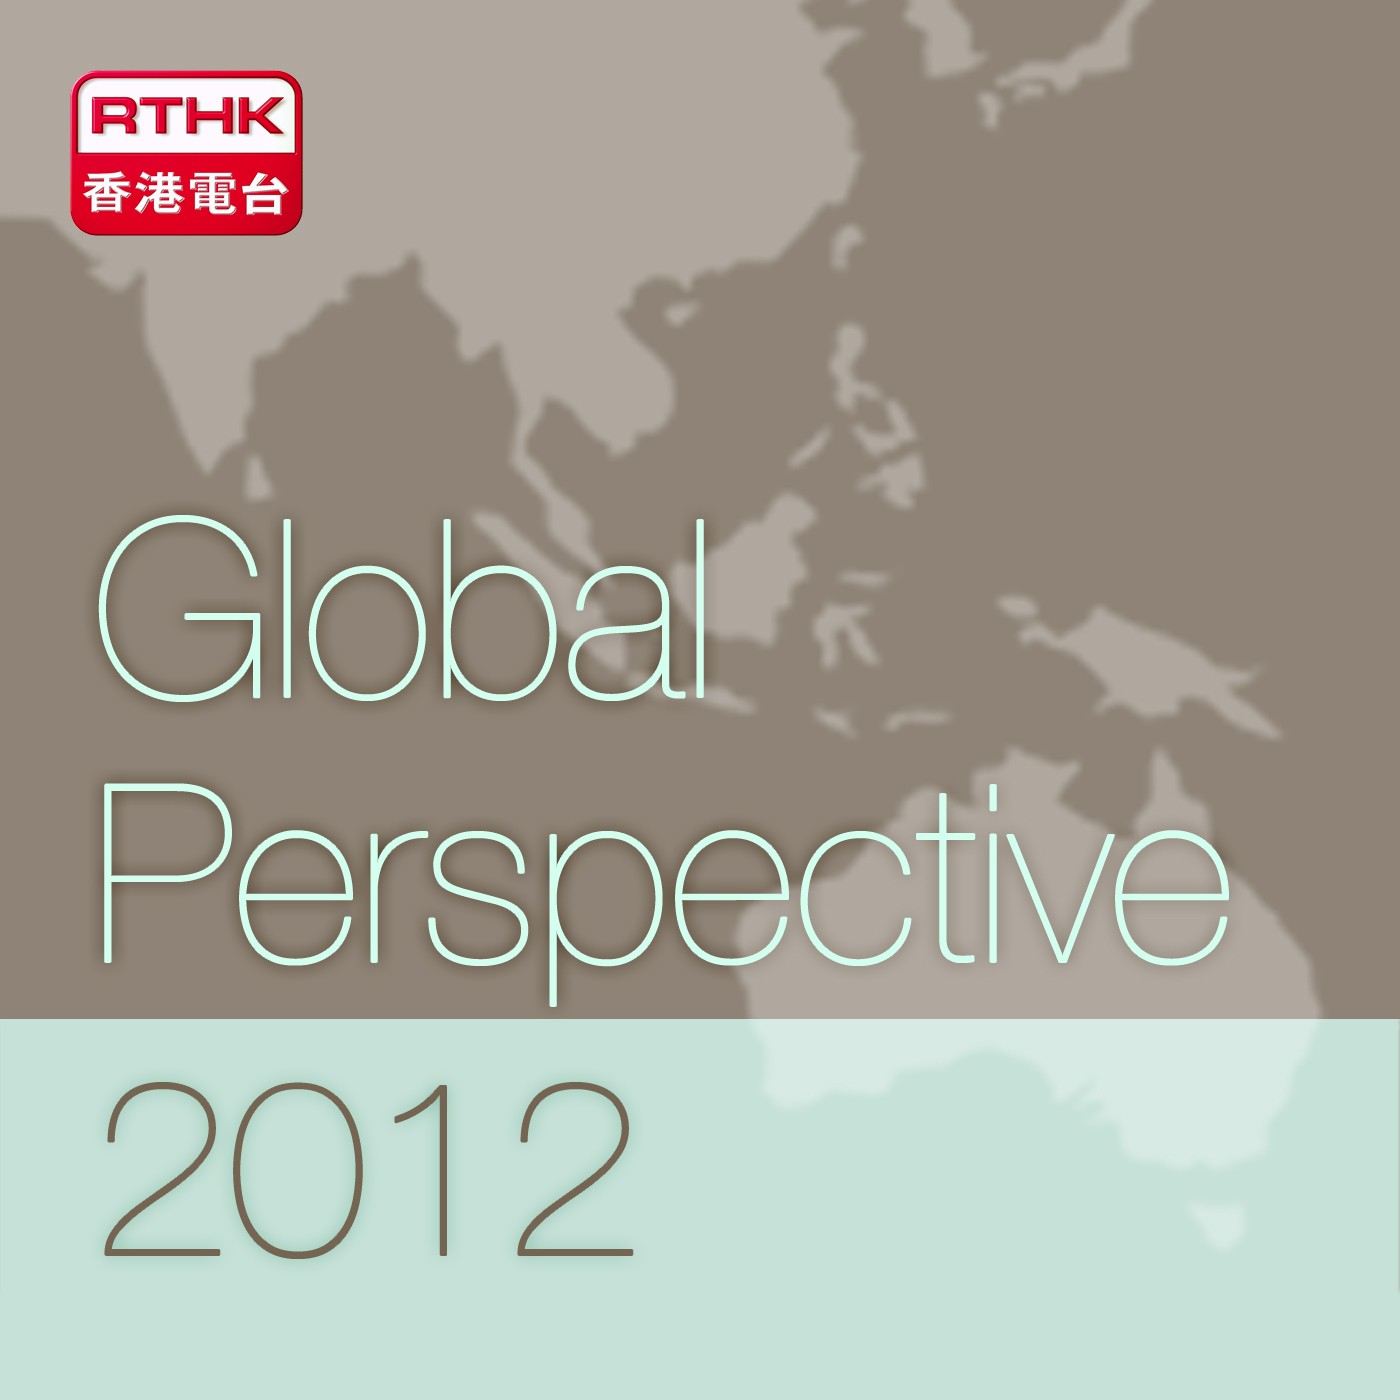 RTHK：Global Perspective